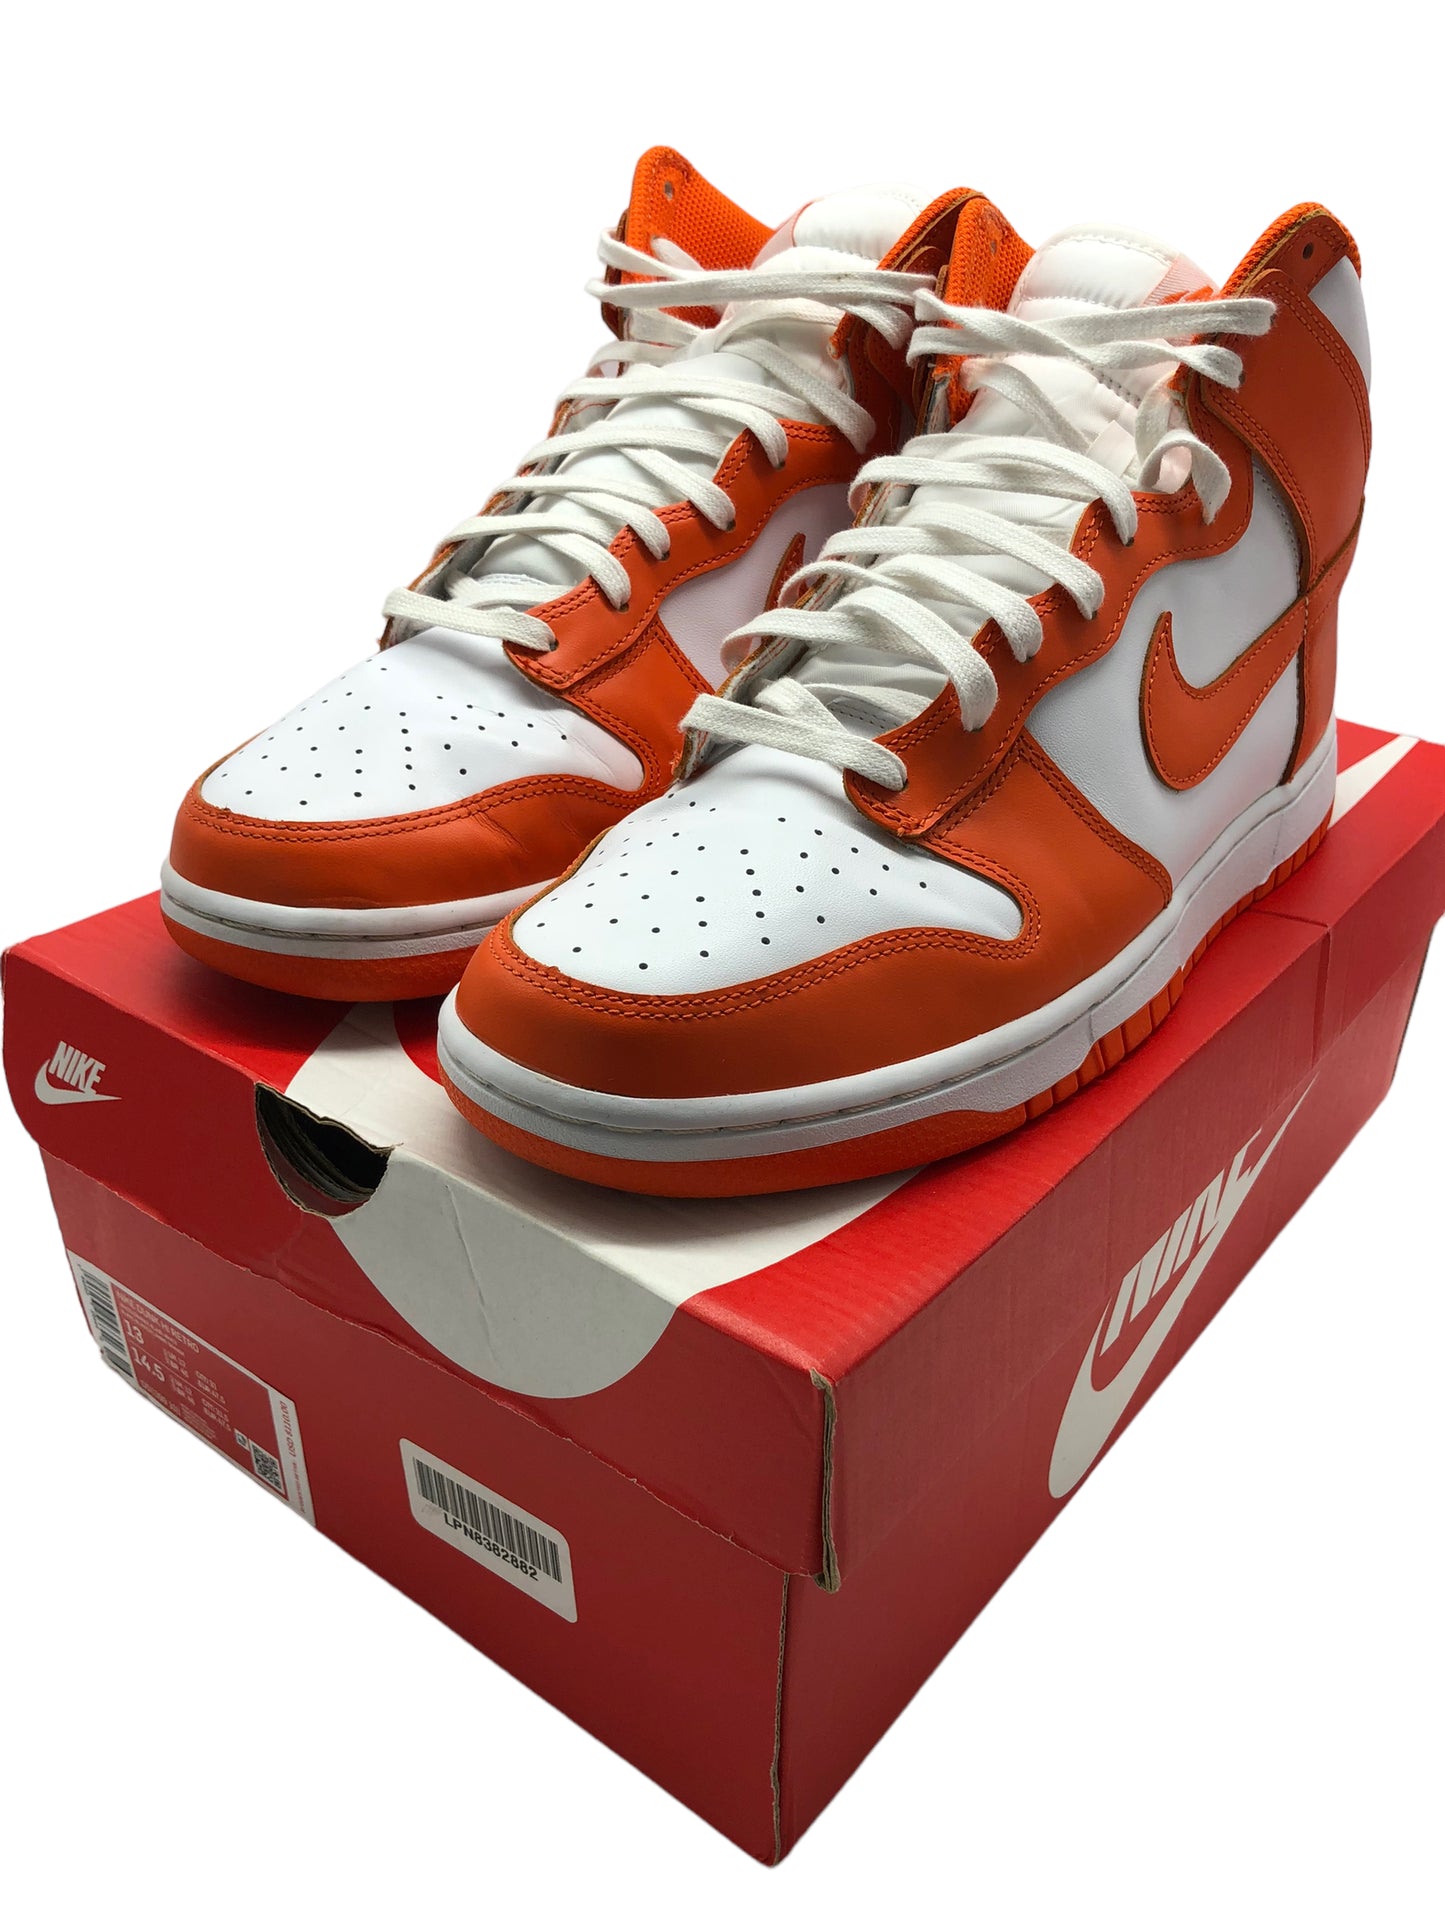 Load image into Gallery viewer, Preowned Nike Dunk High Syracuse (2021) Sz 13
